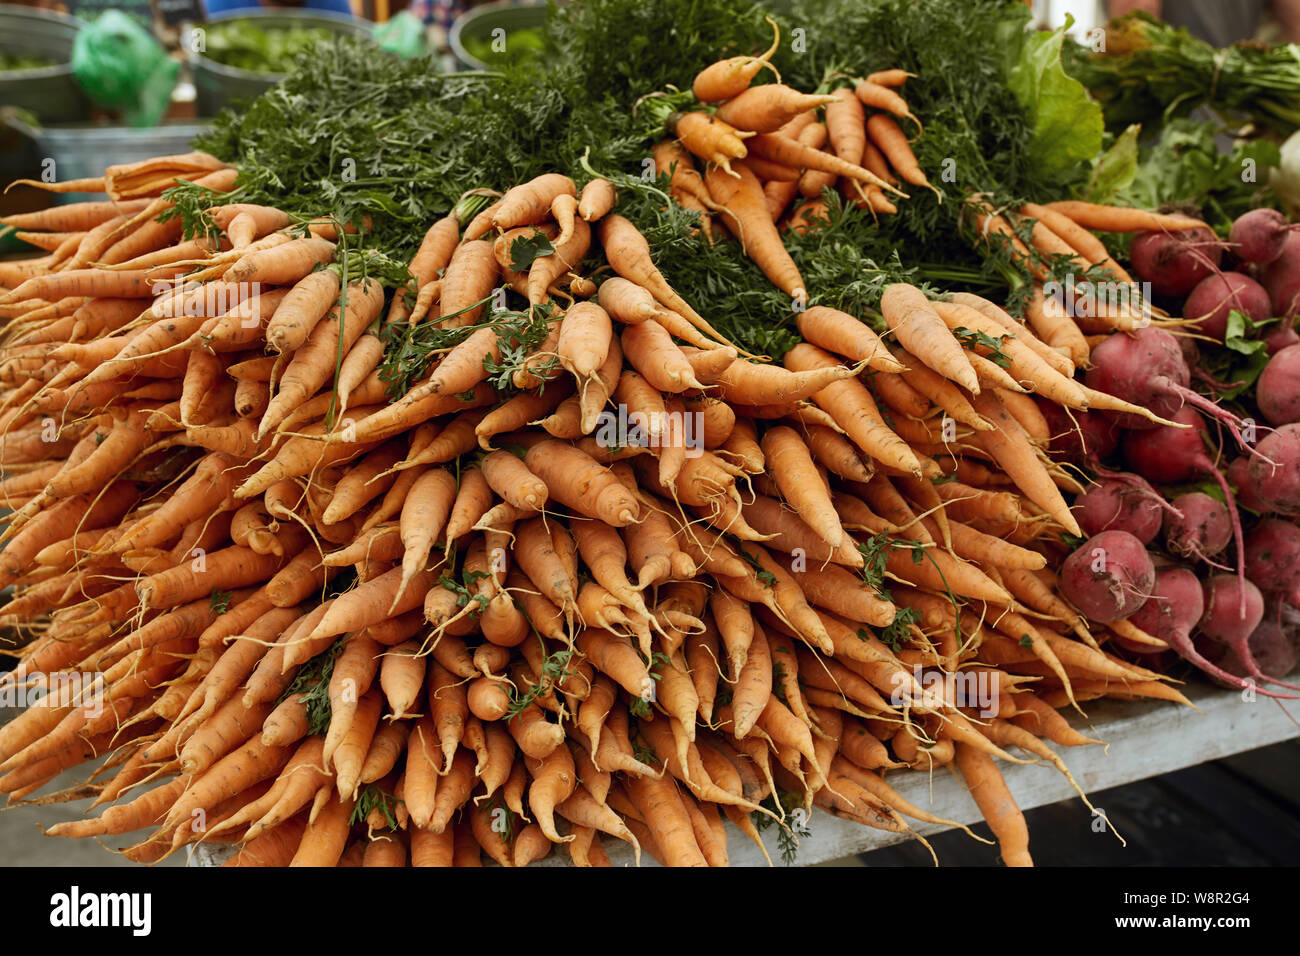 Colorful display of carrots and beets for sell at a Farmers Market in Boulder, Colorado. Beta vulgaris, Daucus carota subsp. sativus Stock Photo